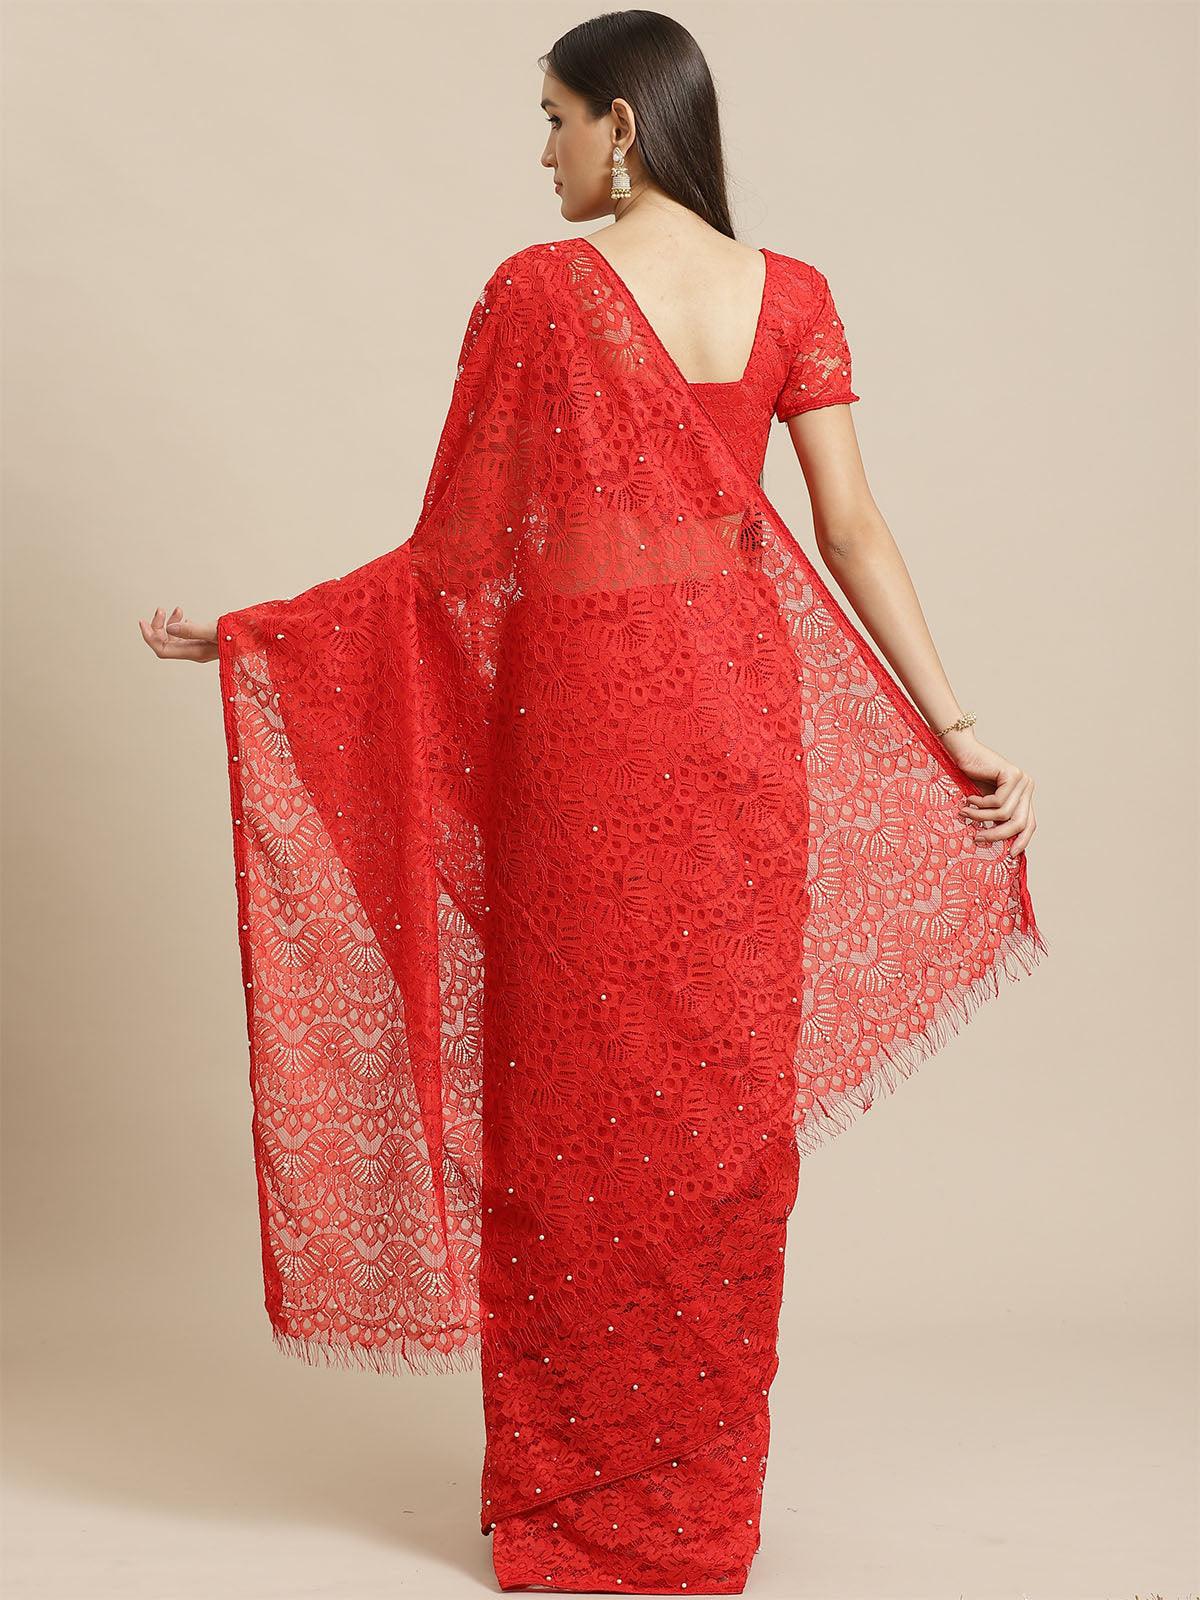 Red Party Wear Net(Super Net) Solid Saree With Unstitched Blouse - Odette